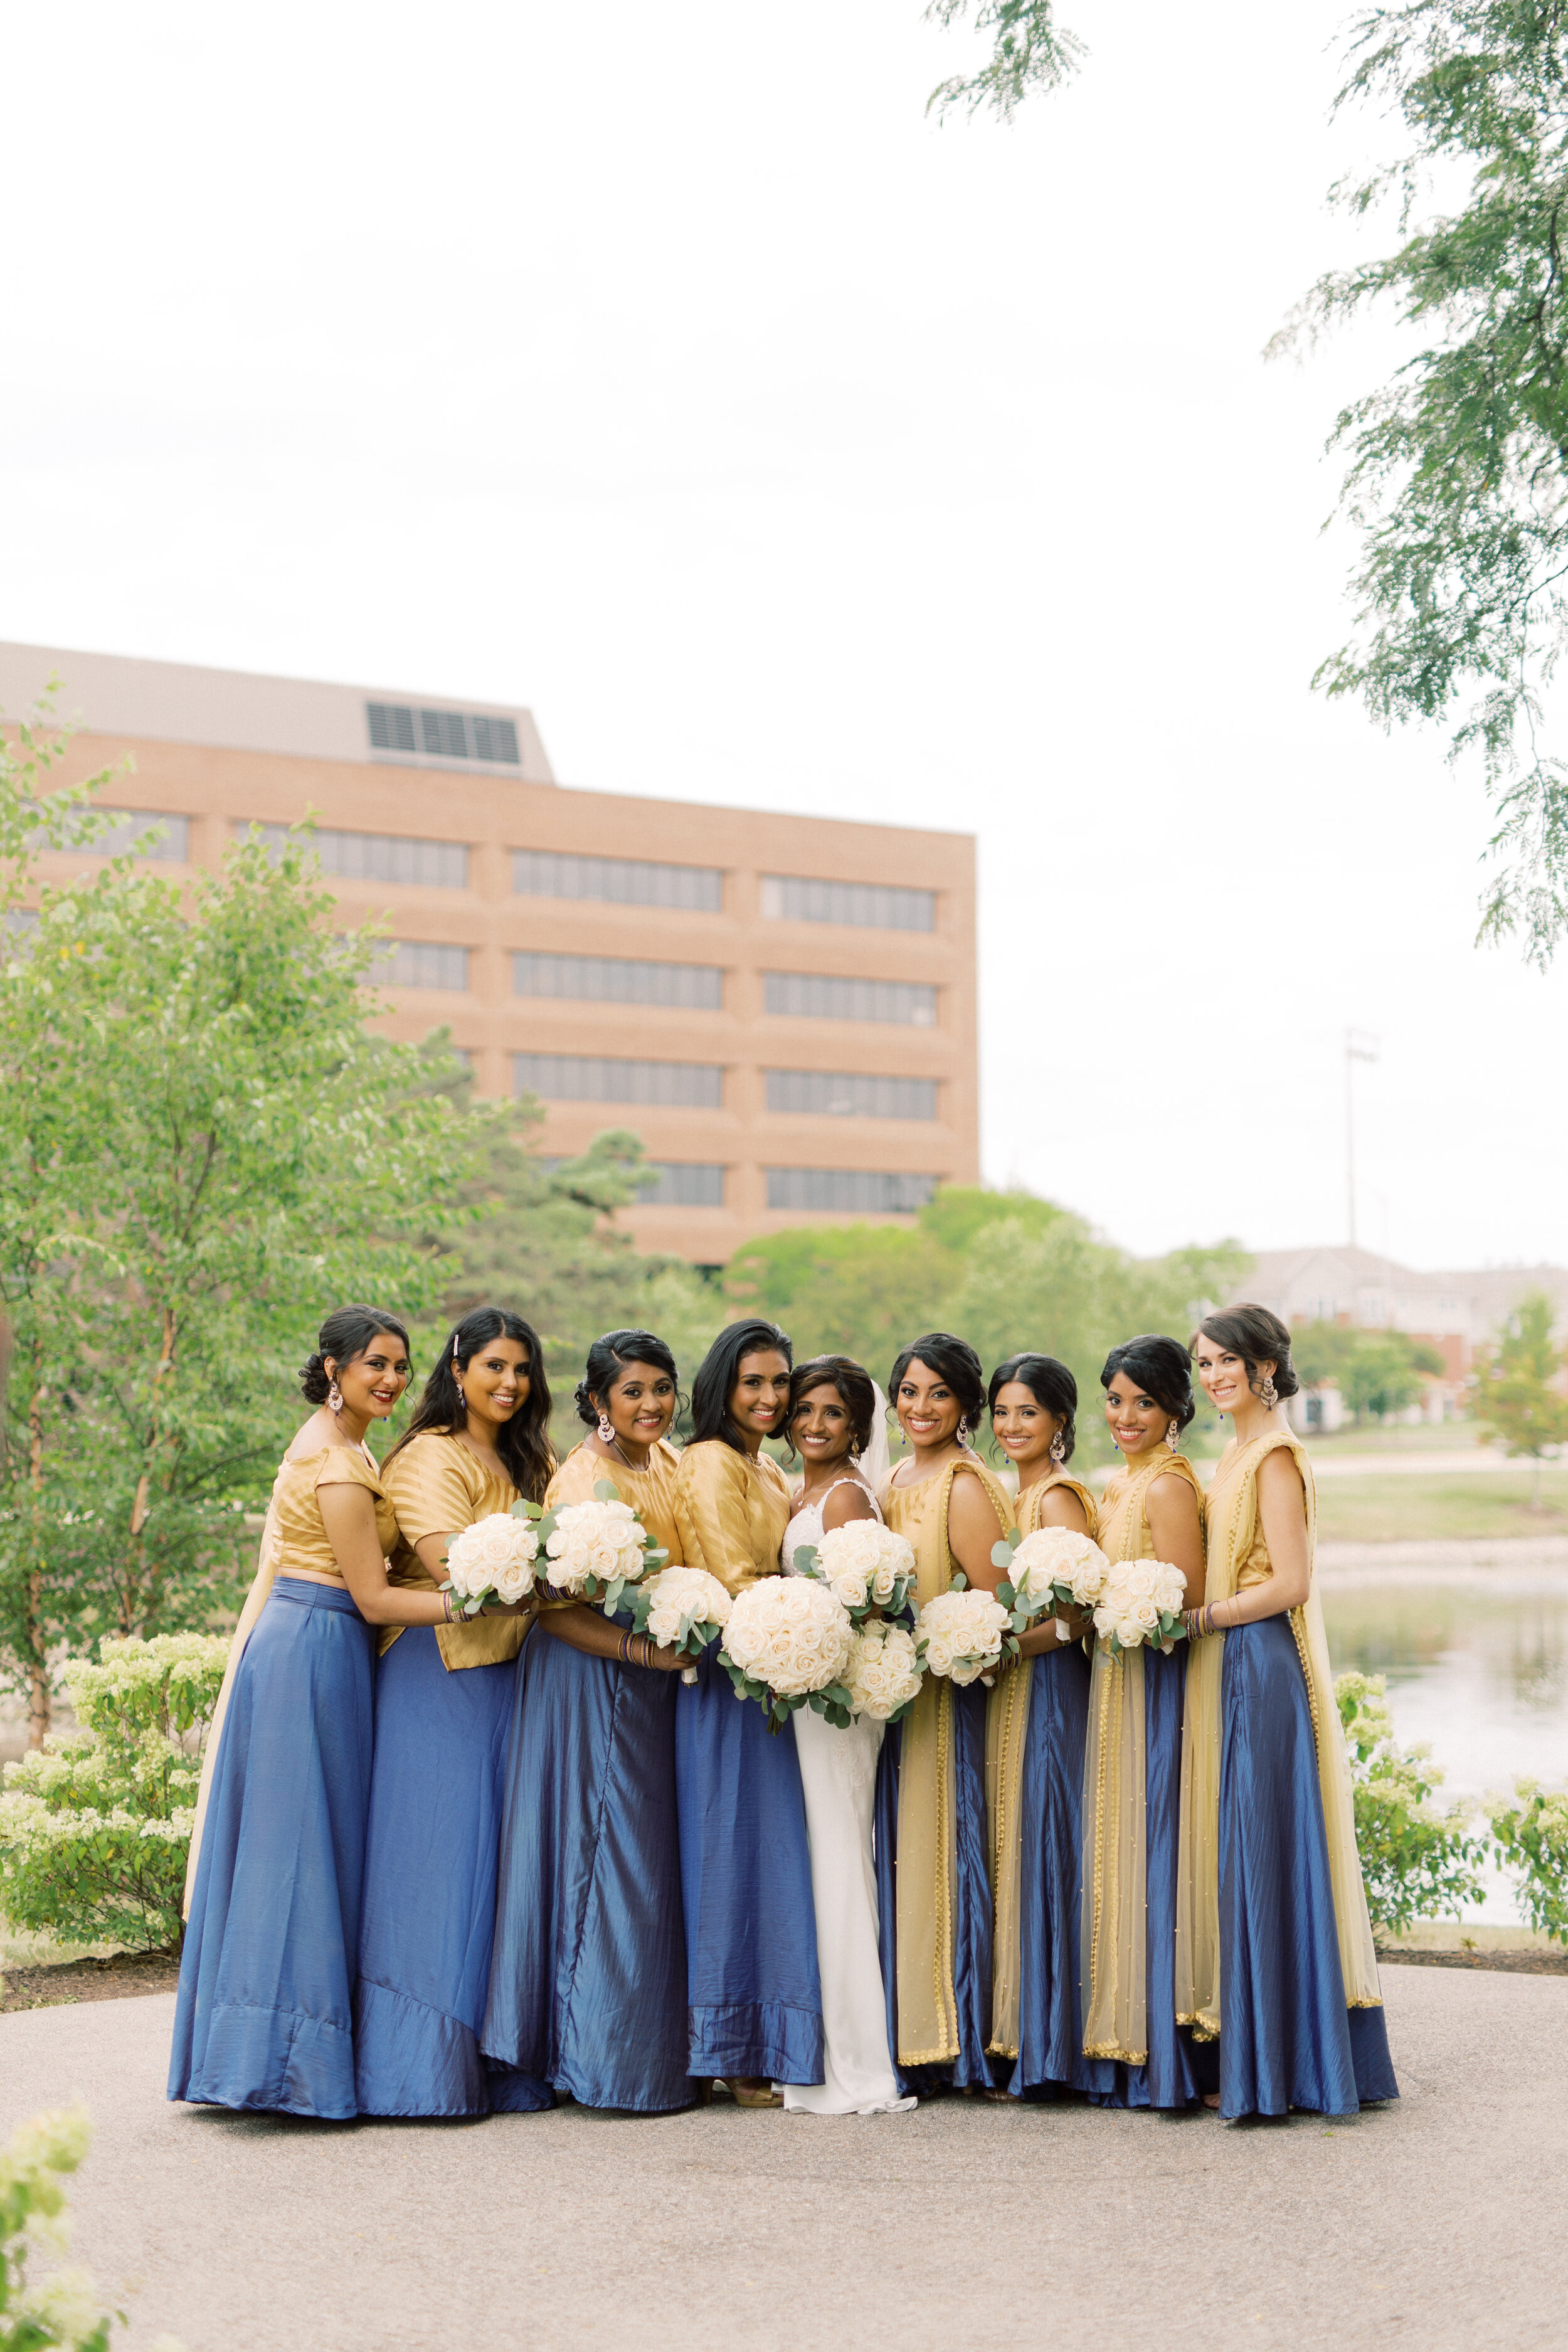 the-cotillion-banquets-indian-wedding-sarah-sunstrom-photography-26.jpg